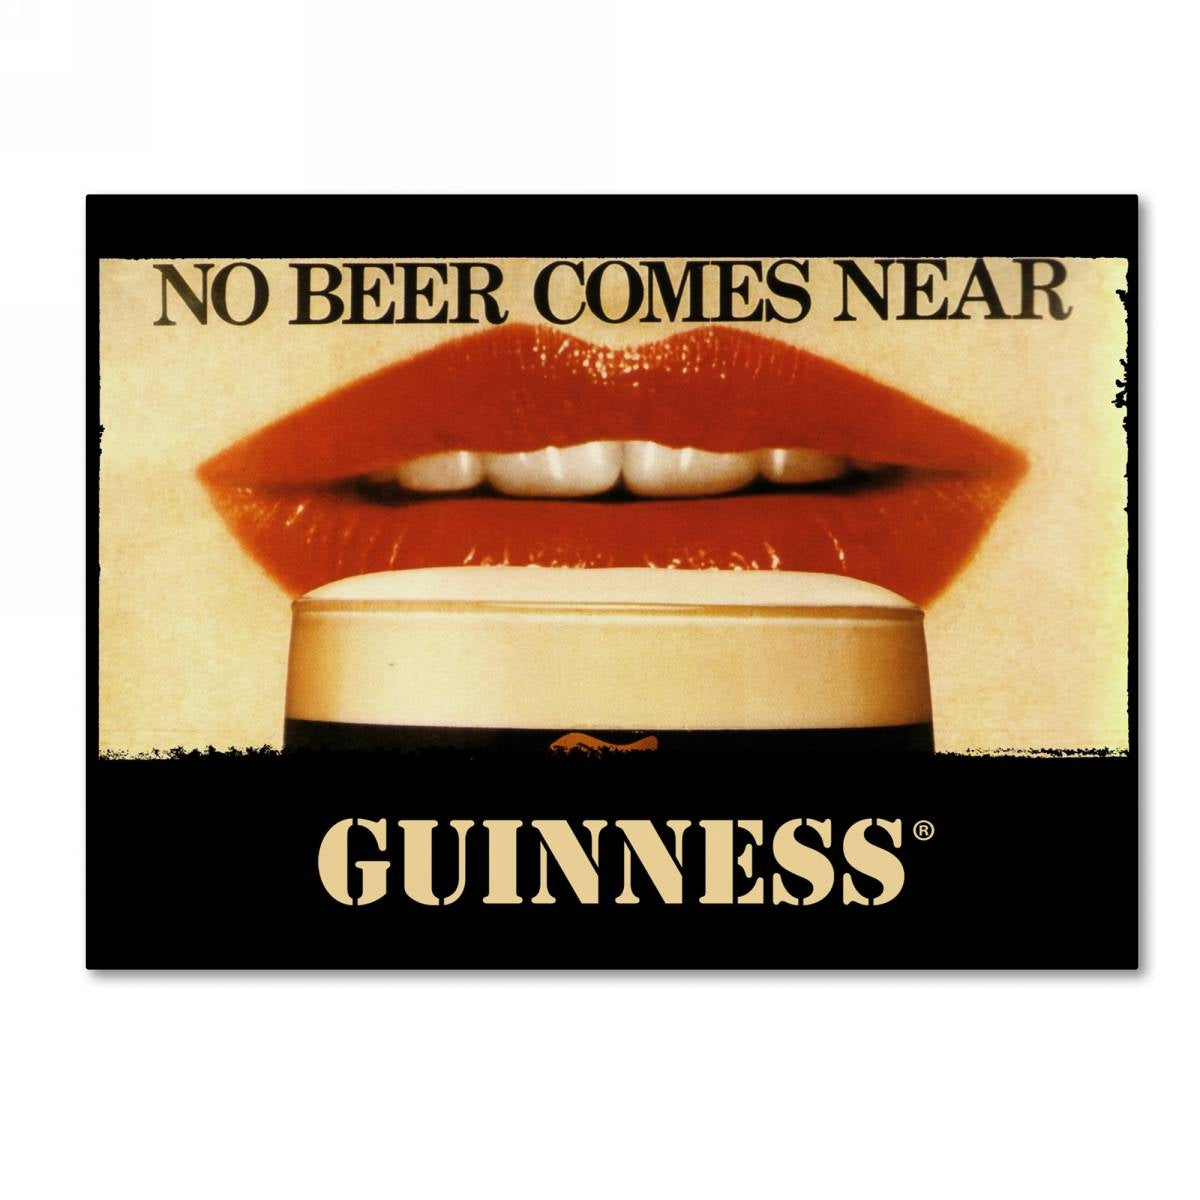 Guinness Brewery 'No Beer Comes Near' Canvas Art: No beer comes near this iconic poster.